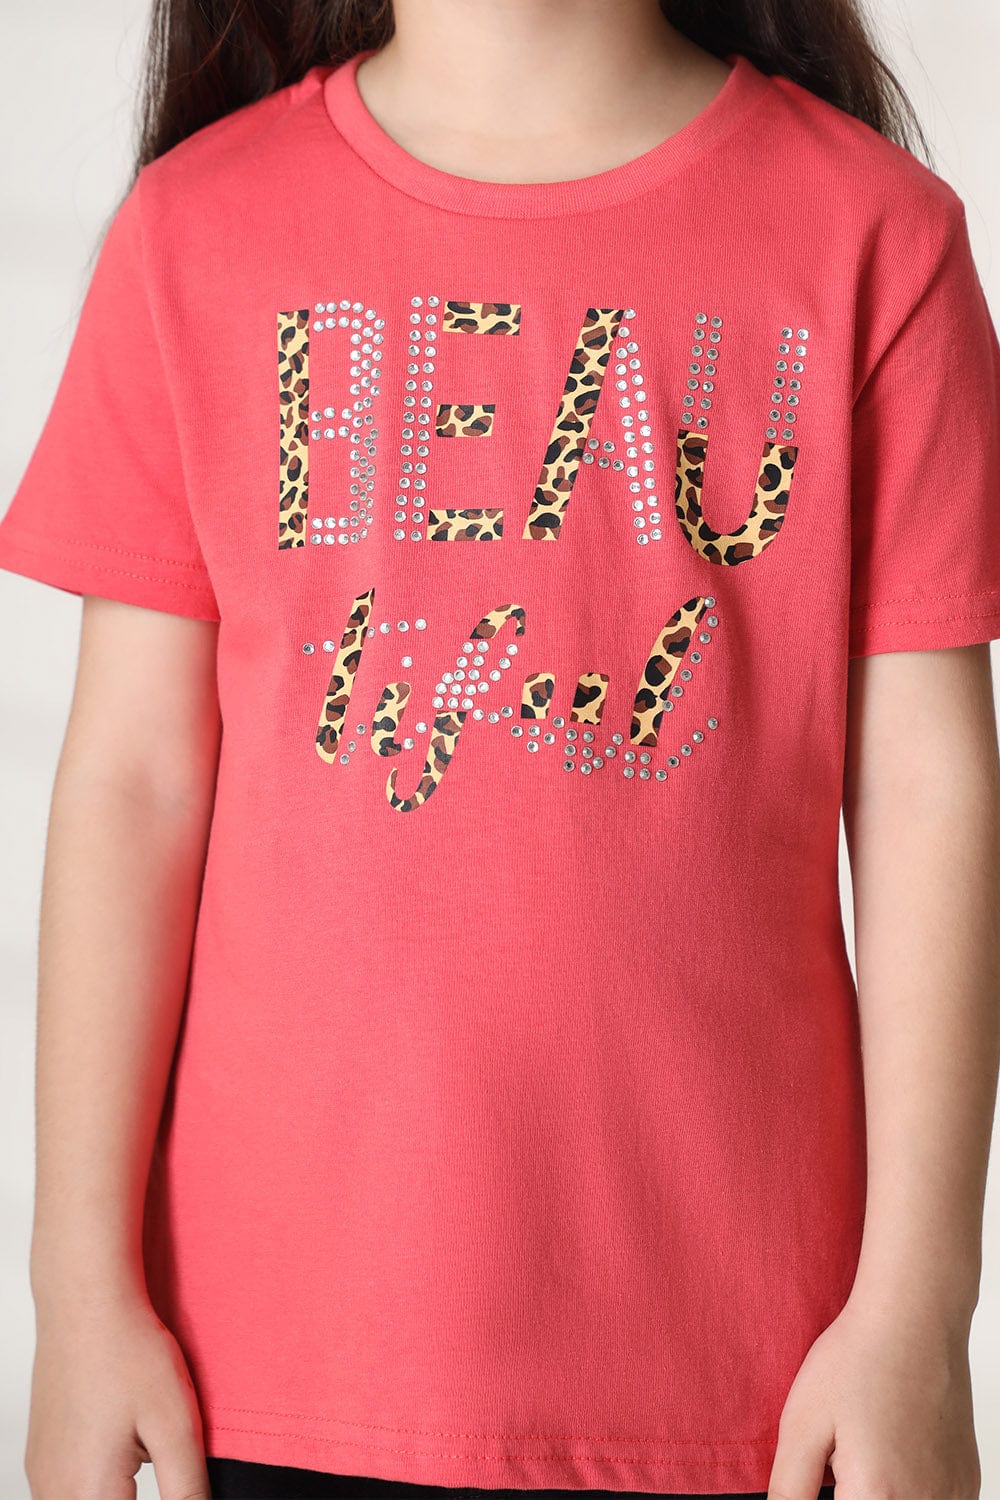 Hope Not Out by Shahid Afridi Girls Knit T-Shirt Stunning Stone-Embellished Pink Half Sleeve Tee for Girls